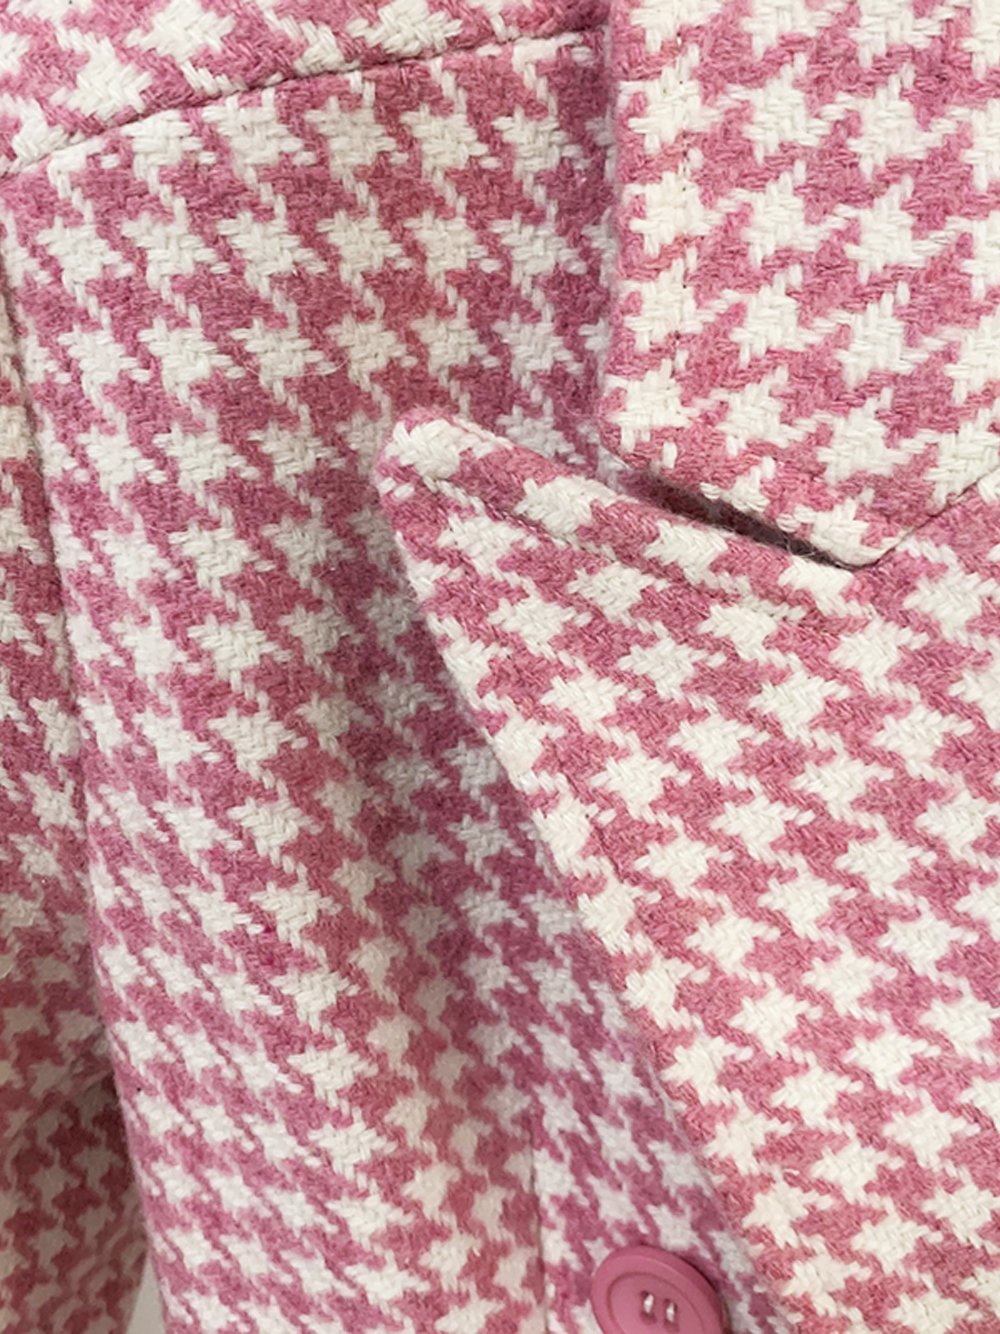 Double Breasted Pink Houndstooth Tweed Coat